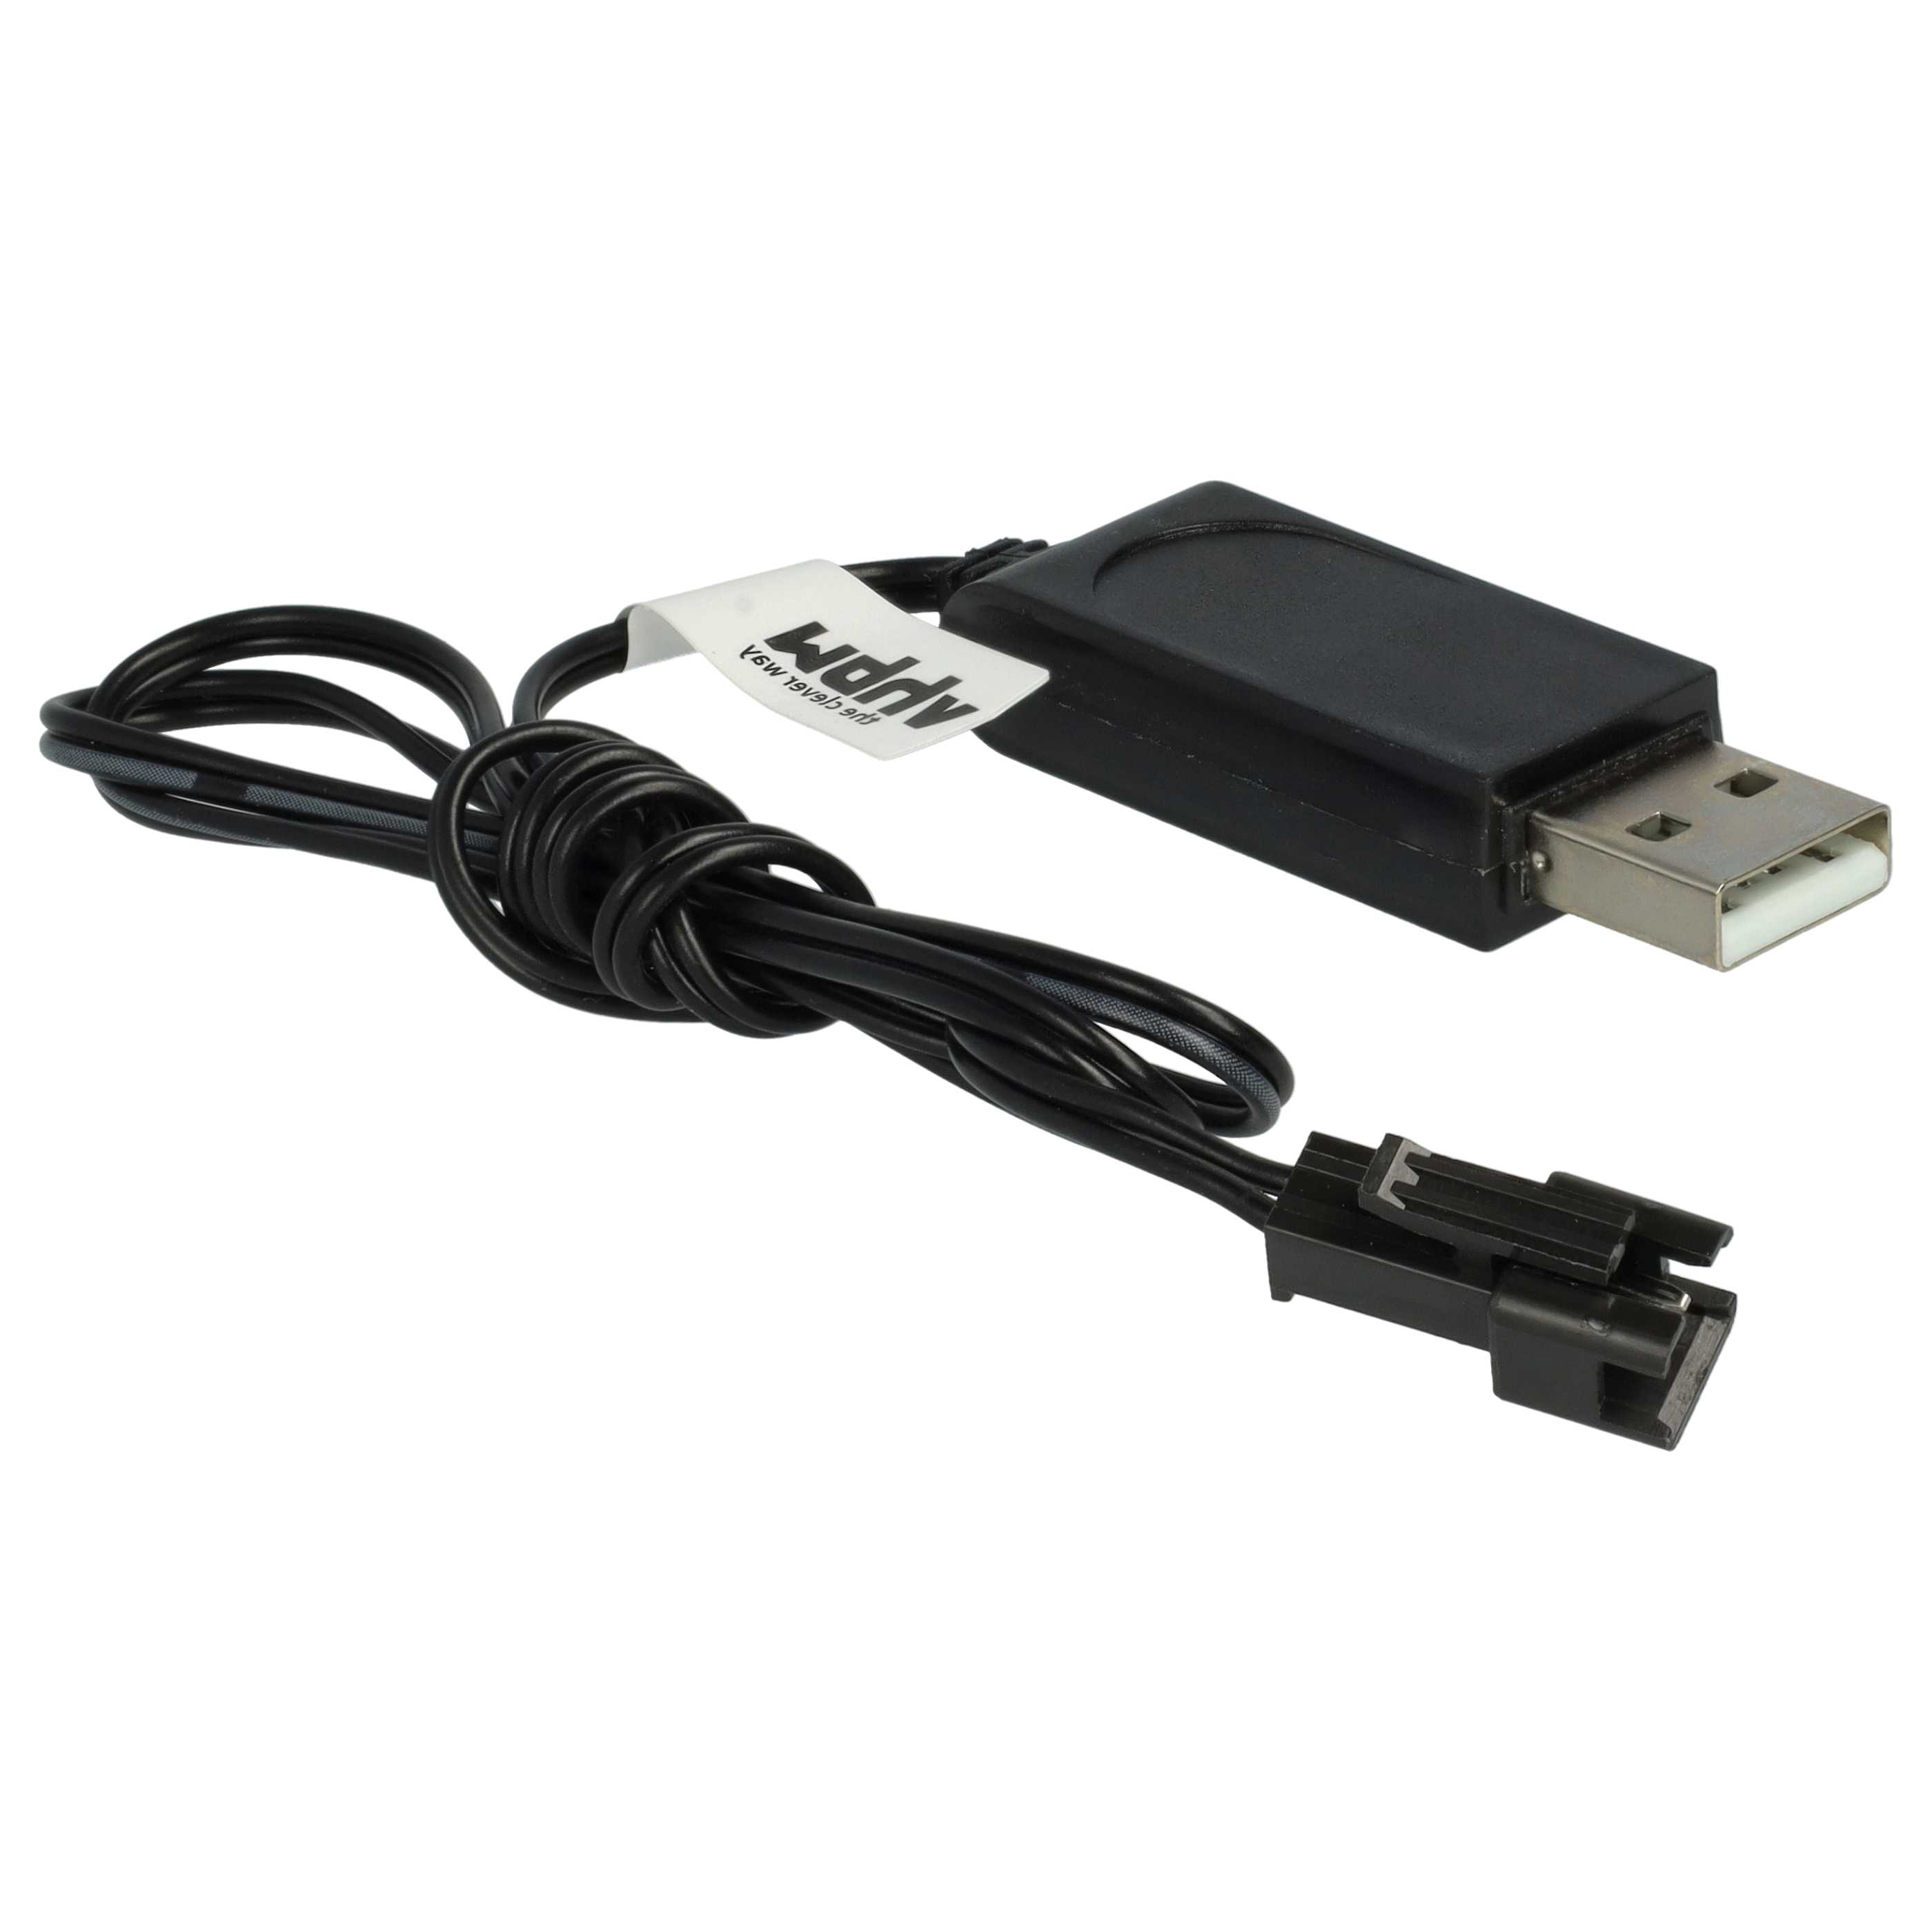 USB Charging Cable suitable for RC Batteries with SM-2P Connector, RC Model Making Battery Packs - 60 cm 6 V